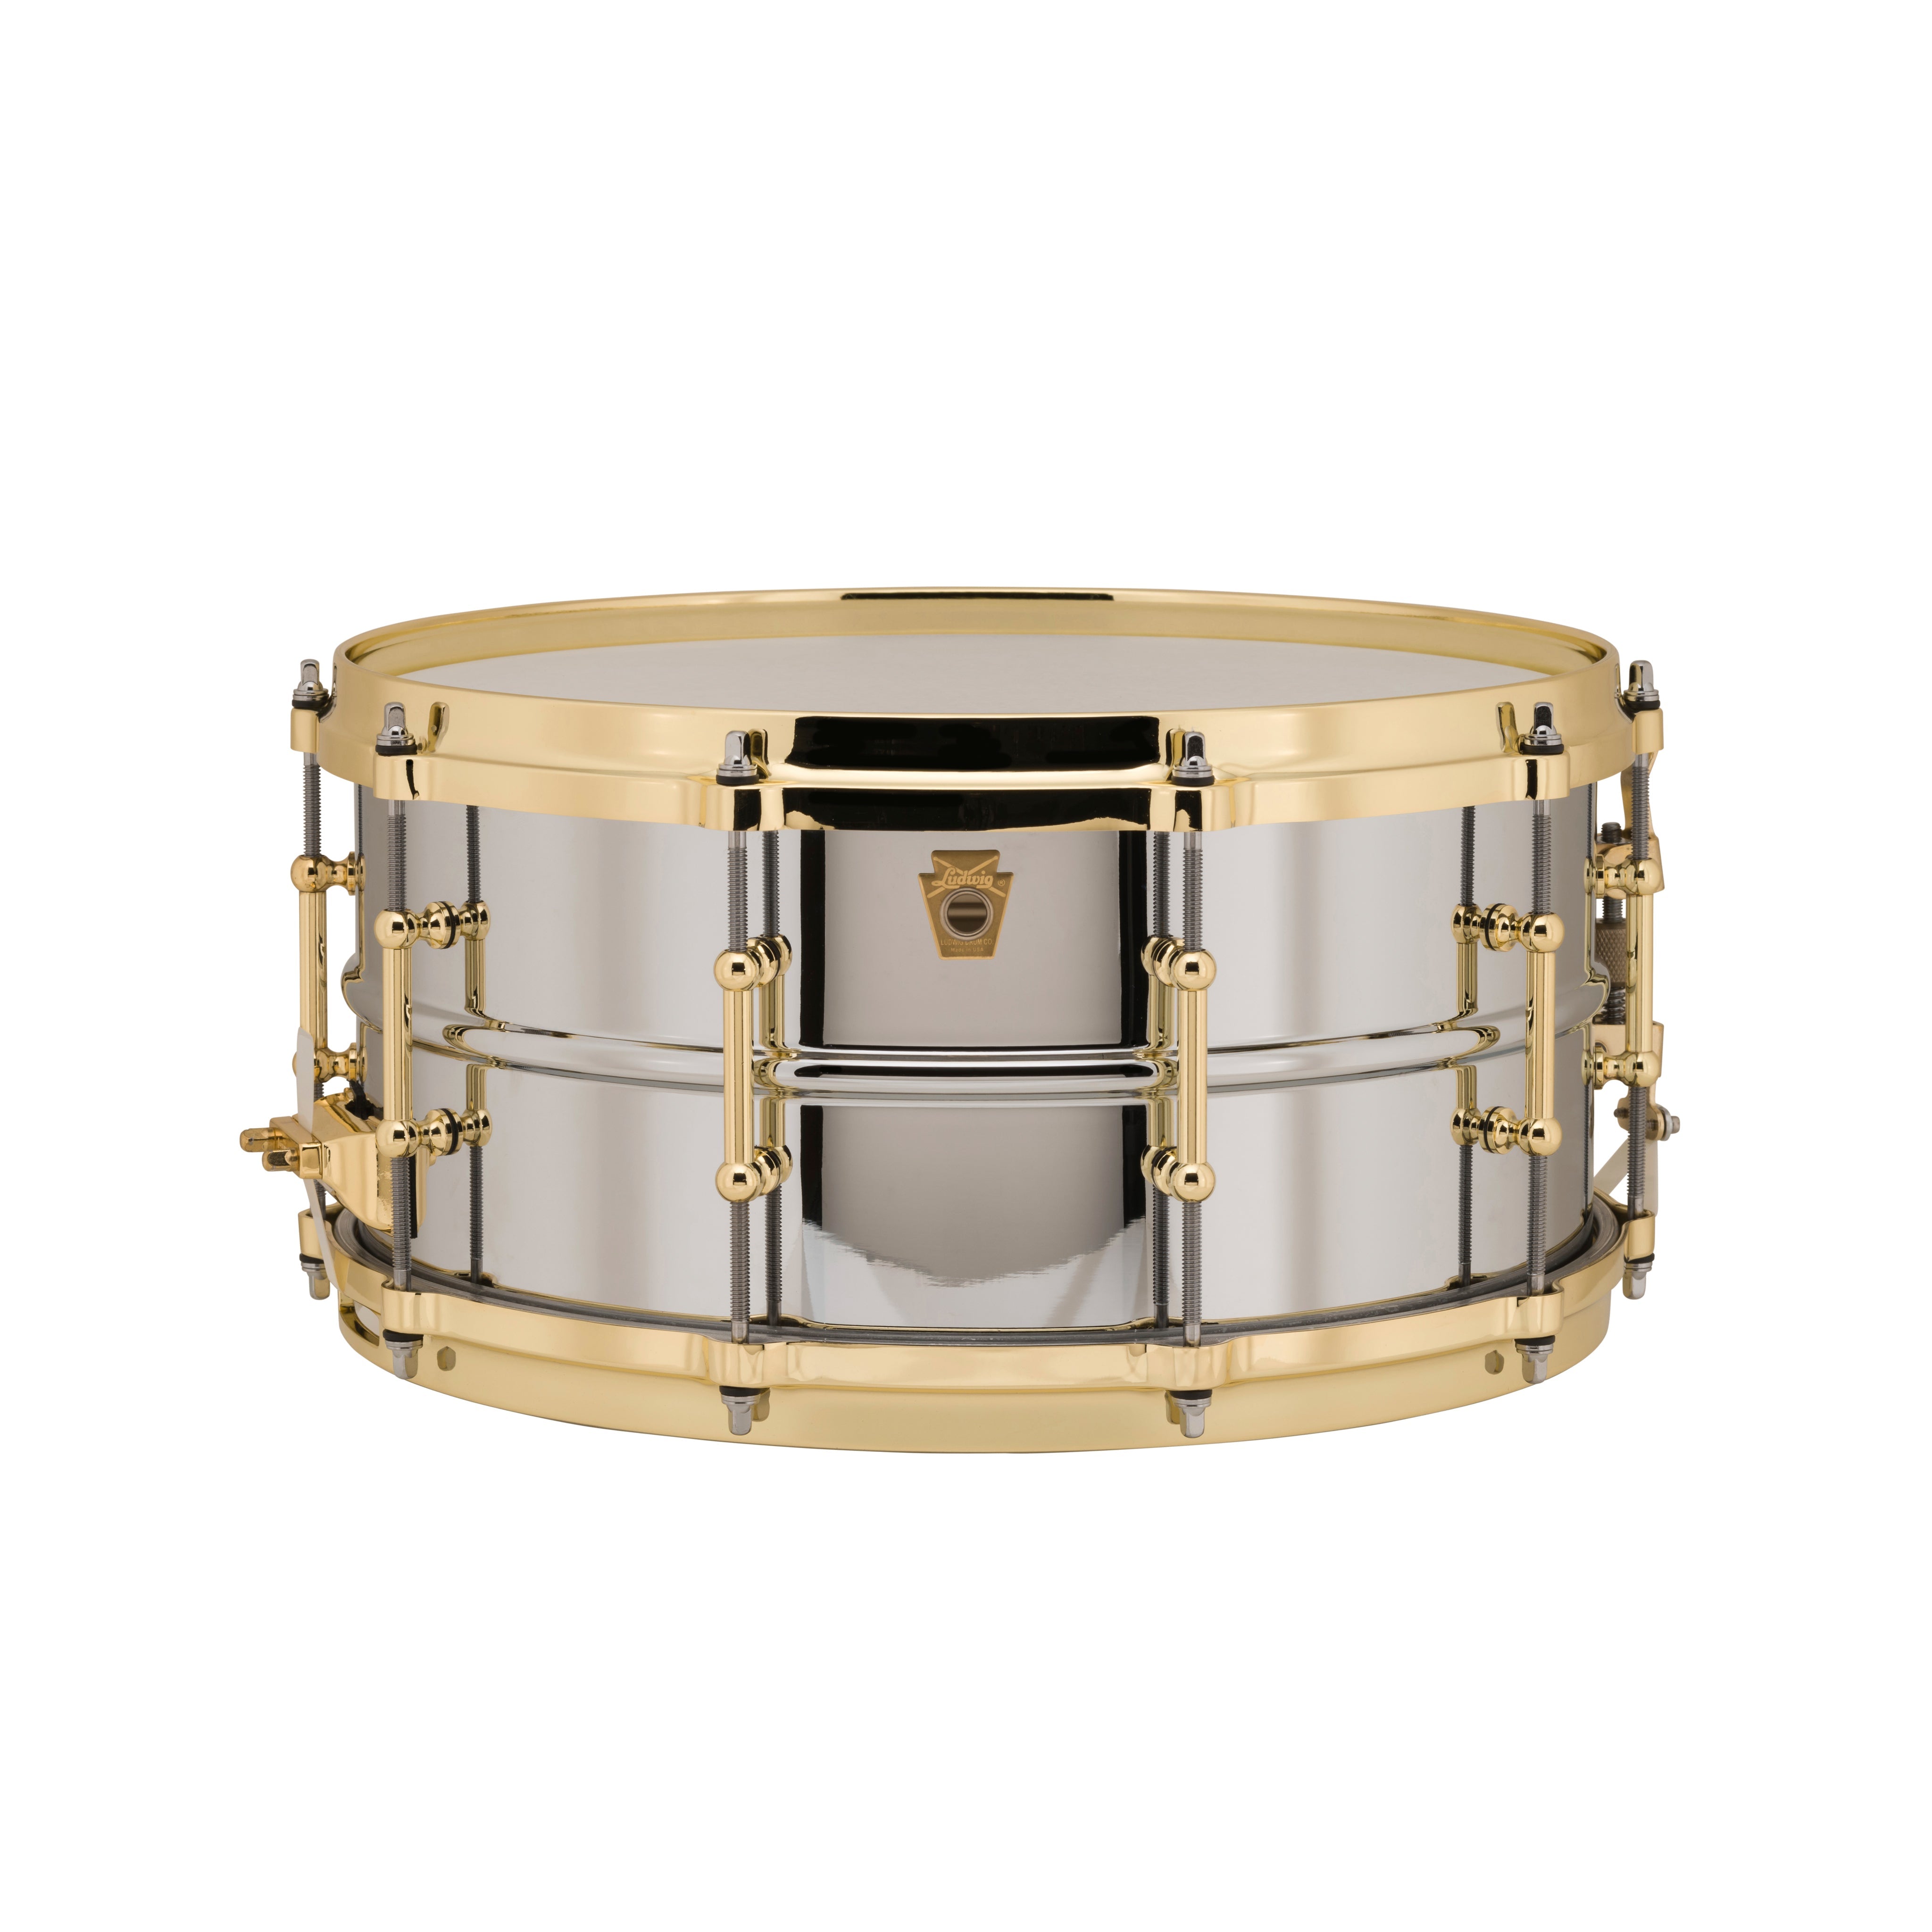 Ludwig LB402BBTWM 6.5x14inch Chrome-Over Brass Snare Drum, Brass Hardware, Tube Lugs